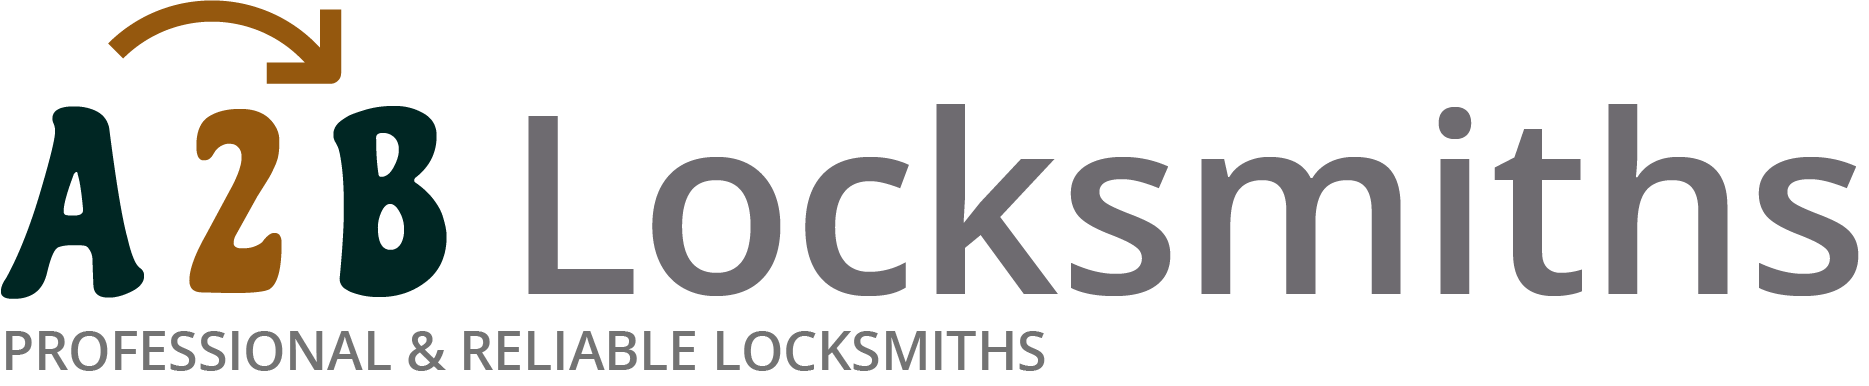 If you are locked out of house in Kilmarnock, our 24/7 local emergency locksmith services can help you.